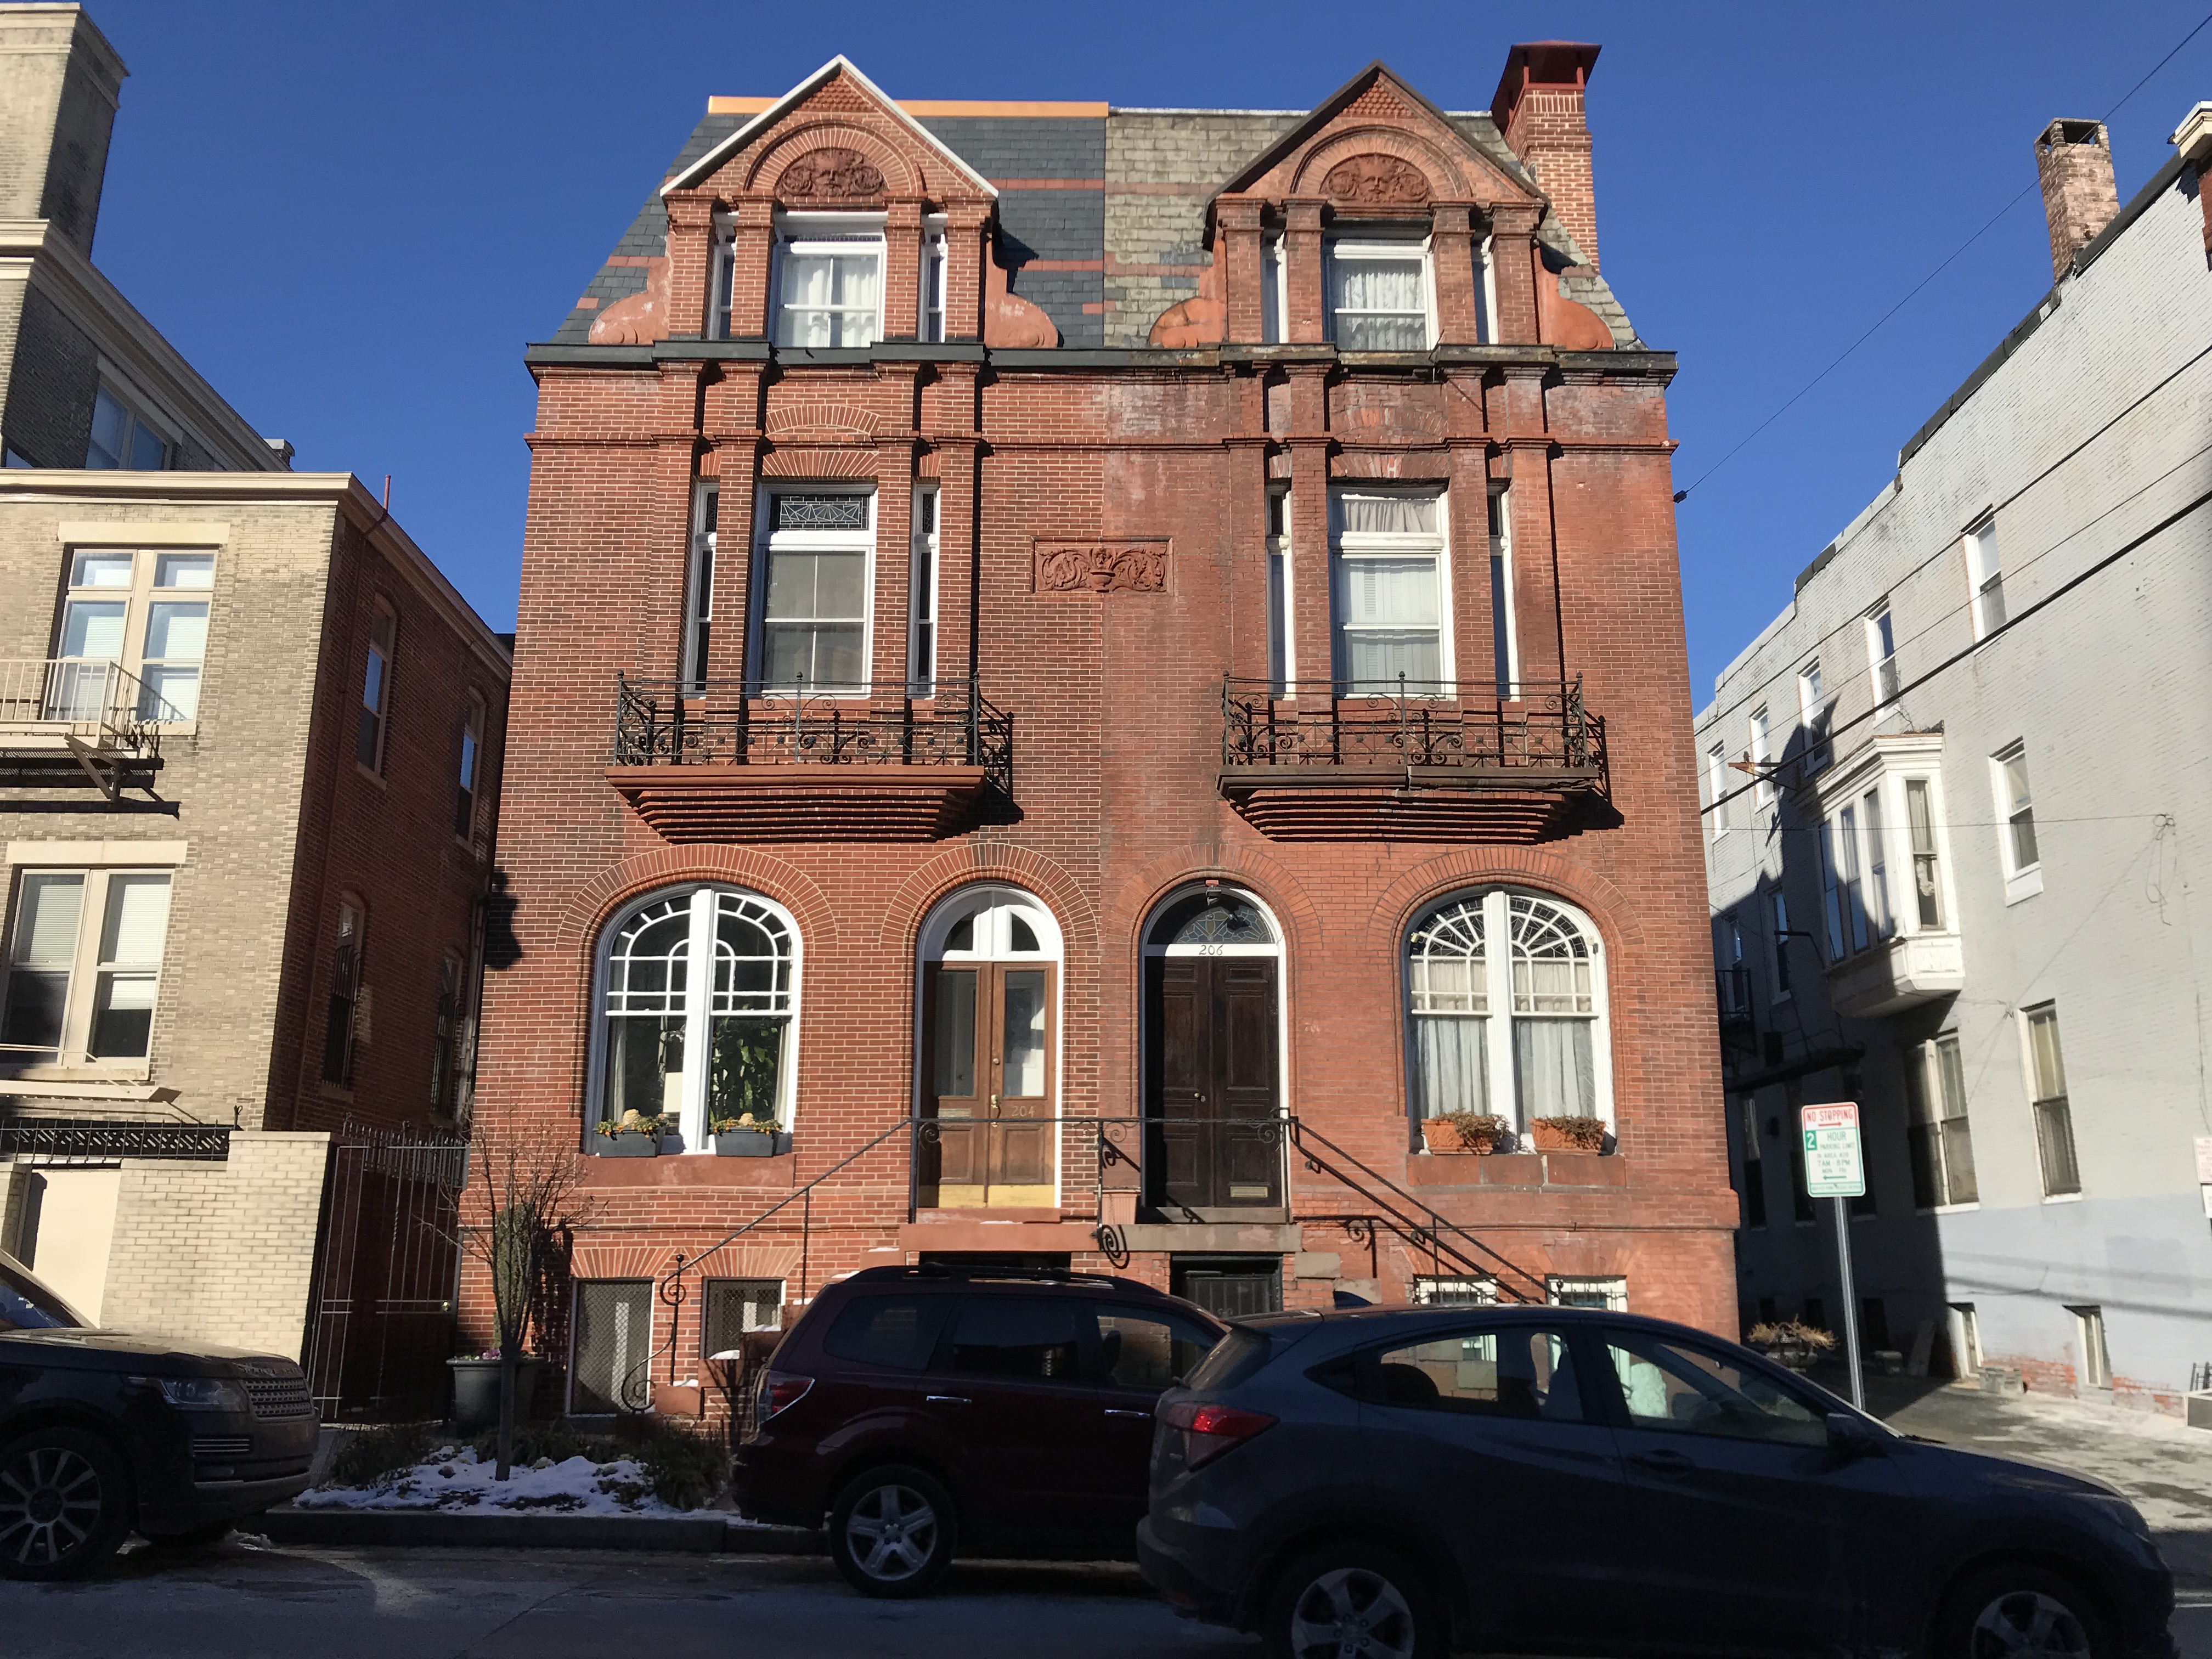 Rowhouses, 204-206 E. Biddle Street, Baltimore, MD 21202, Architecture, Baltimore, Biddle Street, Building, HQ Photo